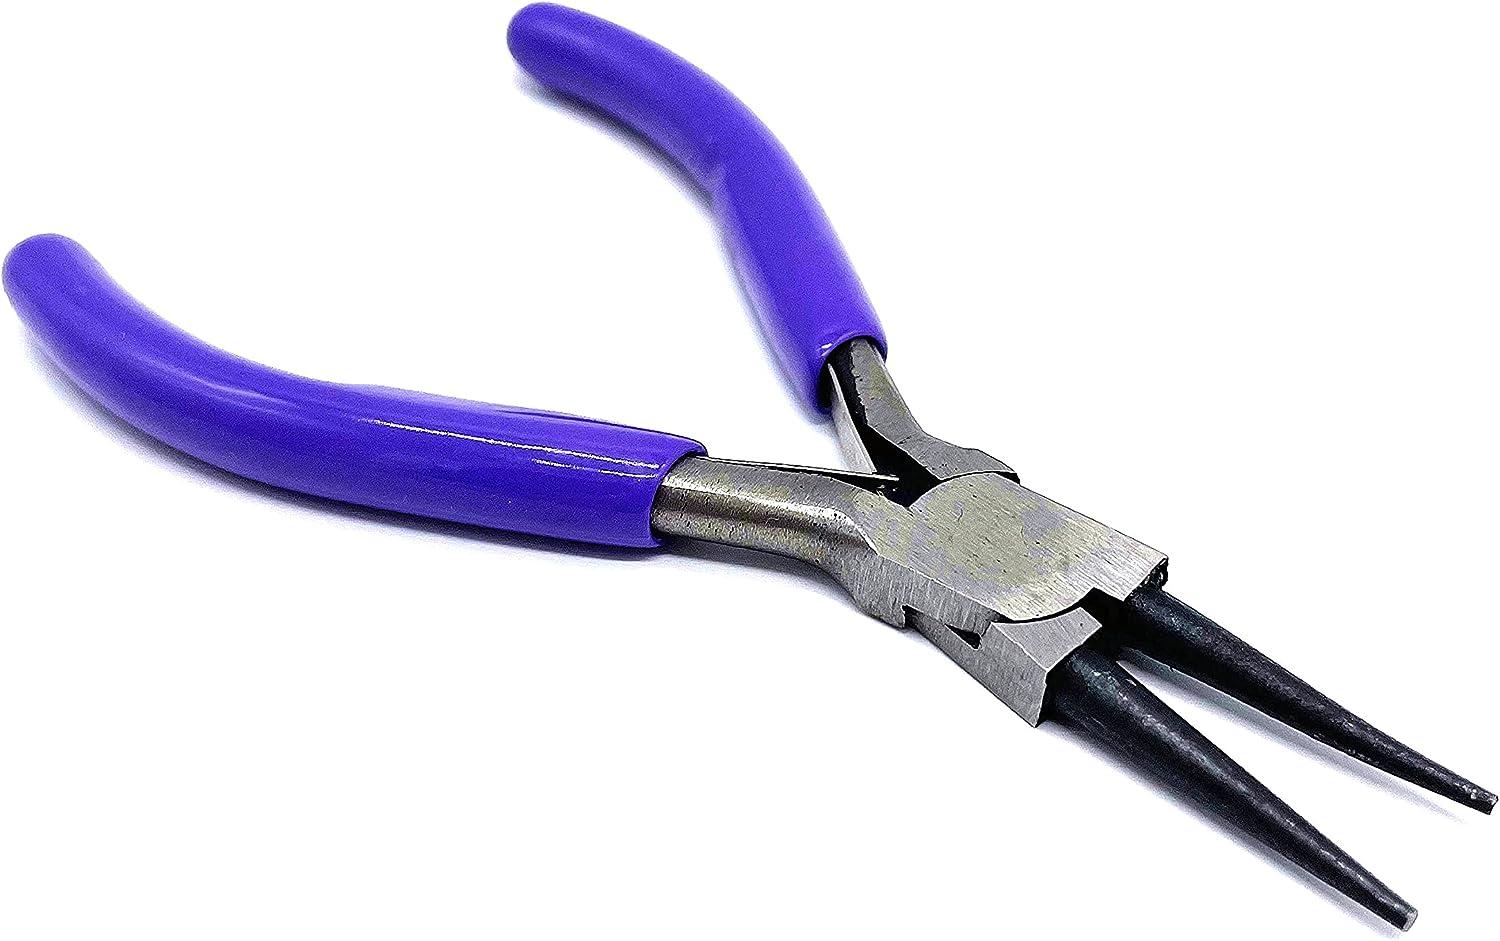 3pcs Pliers For Jewelry Making, Jewelry Pliers Set Including